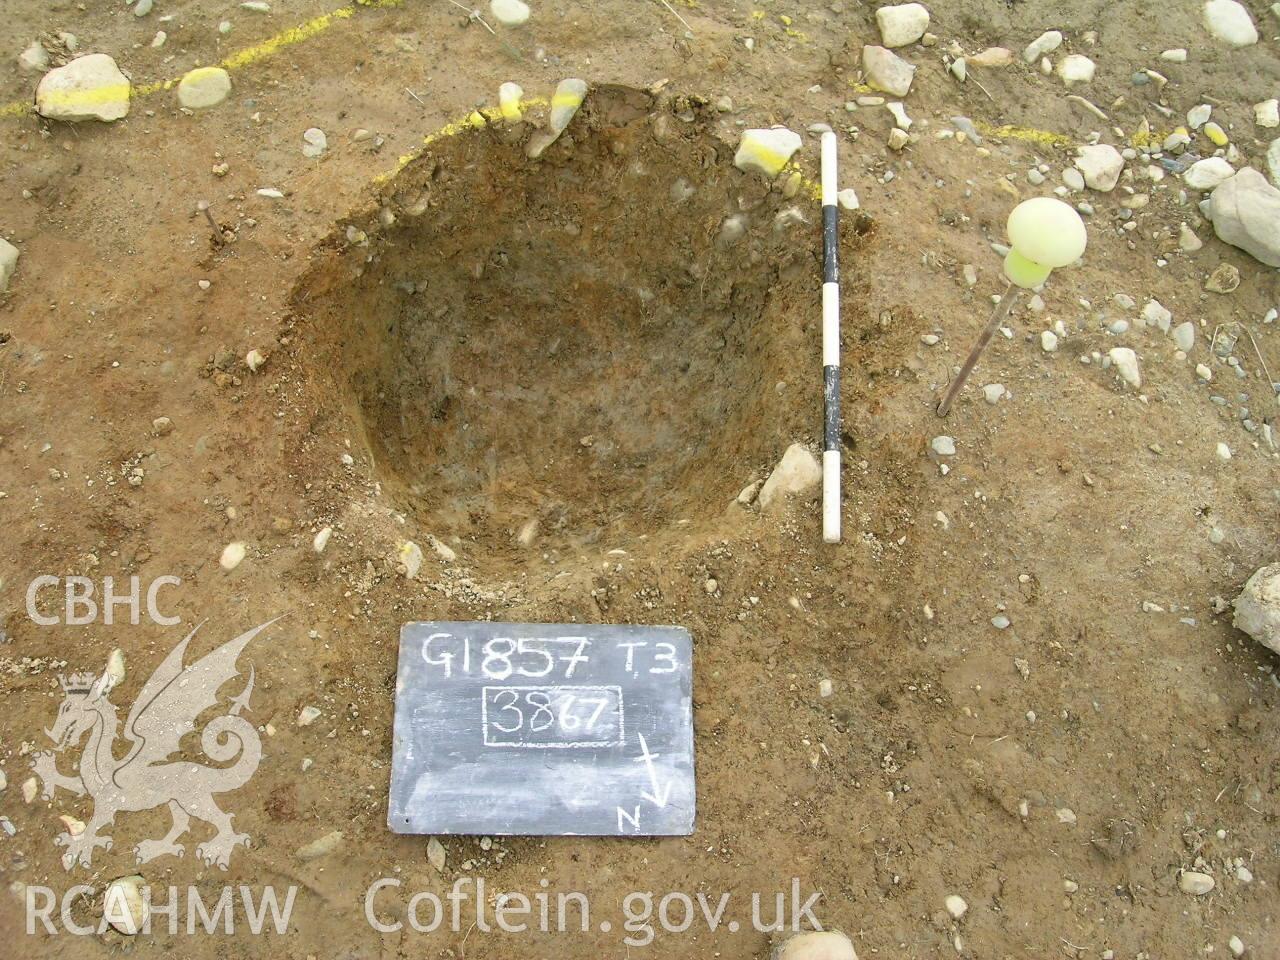 Digital photograph from excavation of Parc Bryn Cegin, Llandygai, by Gwynedd Archaeological Trust. Post-exc. Pit [3867], from NE (numbers refer to context records). Scale 0.5m.